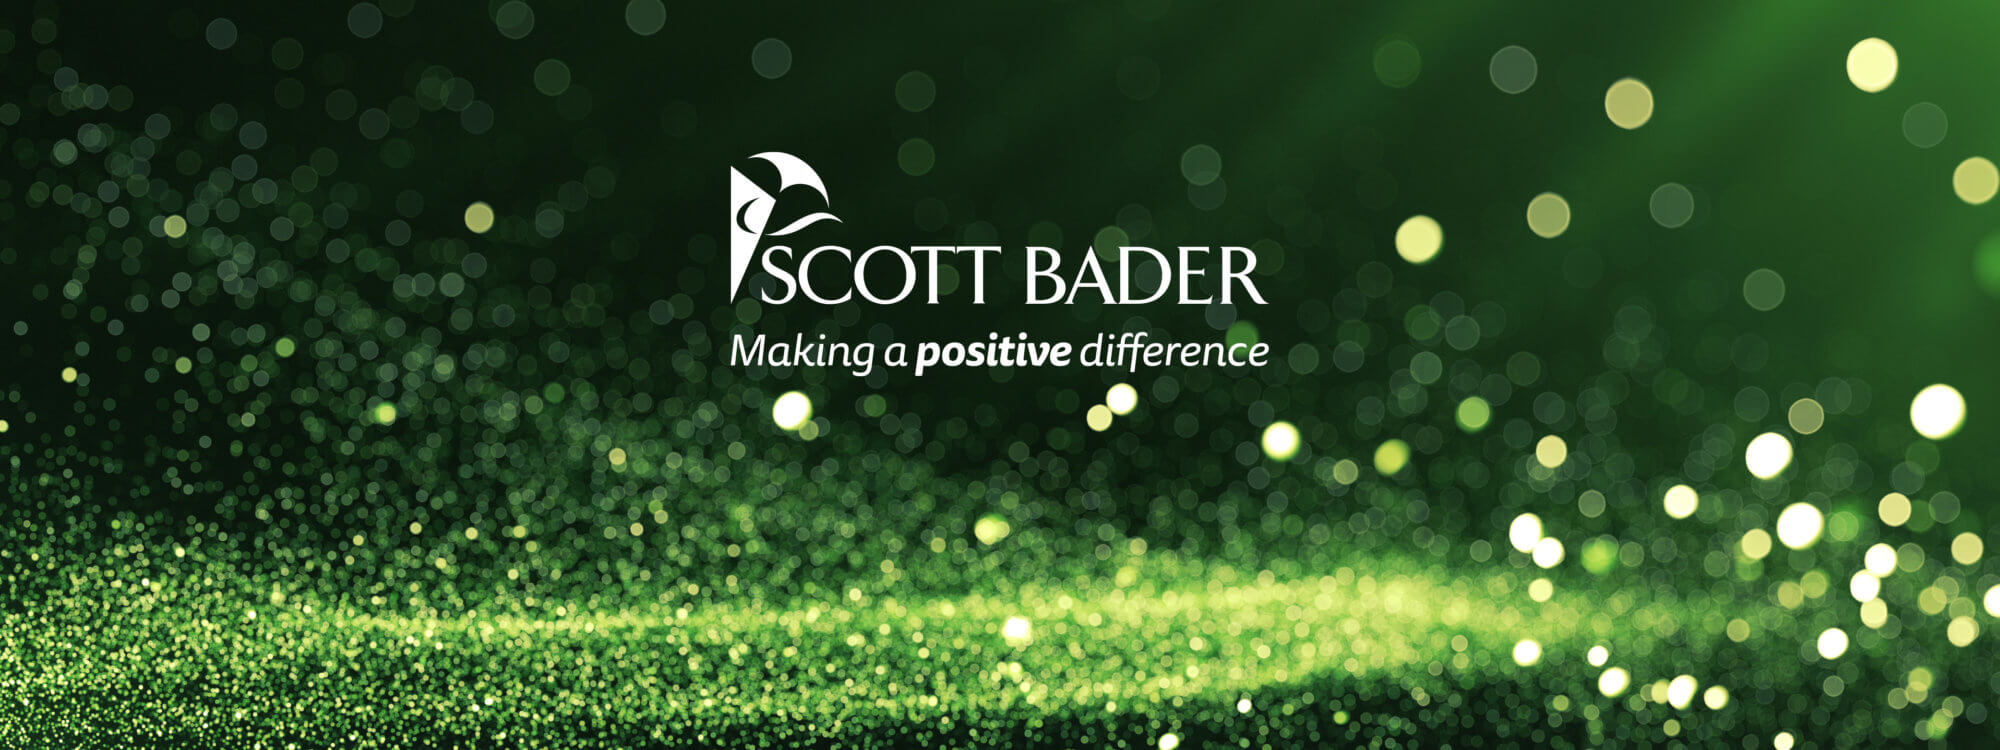 Scott Bader joins CHAMPION project to research novel bio-based polymers